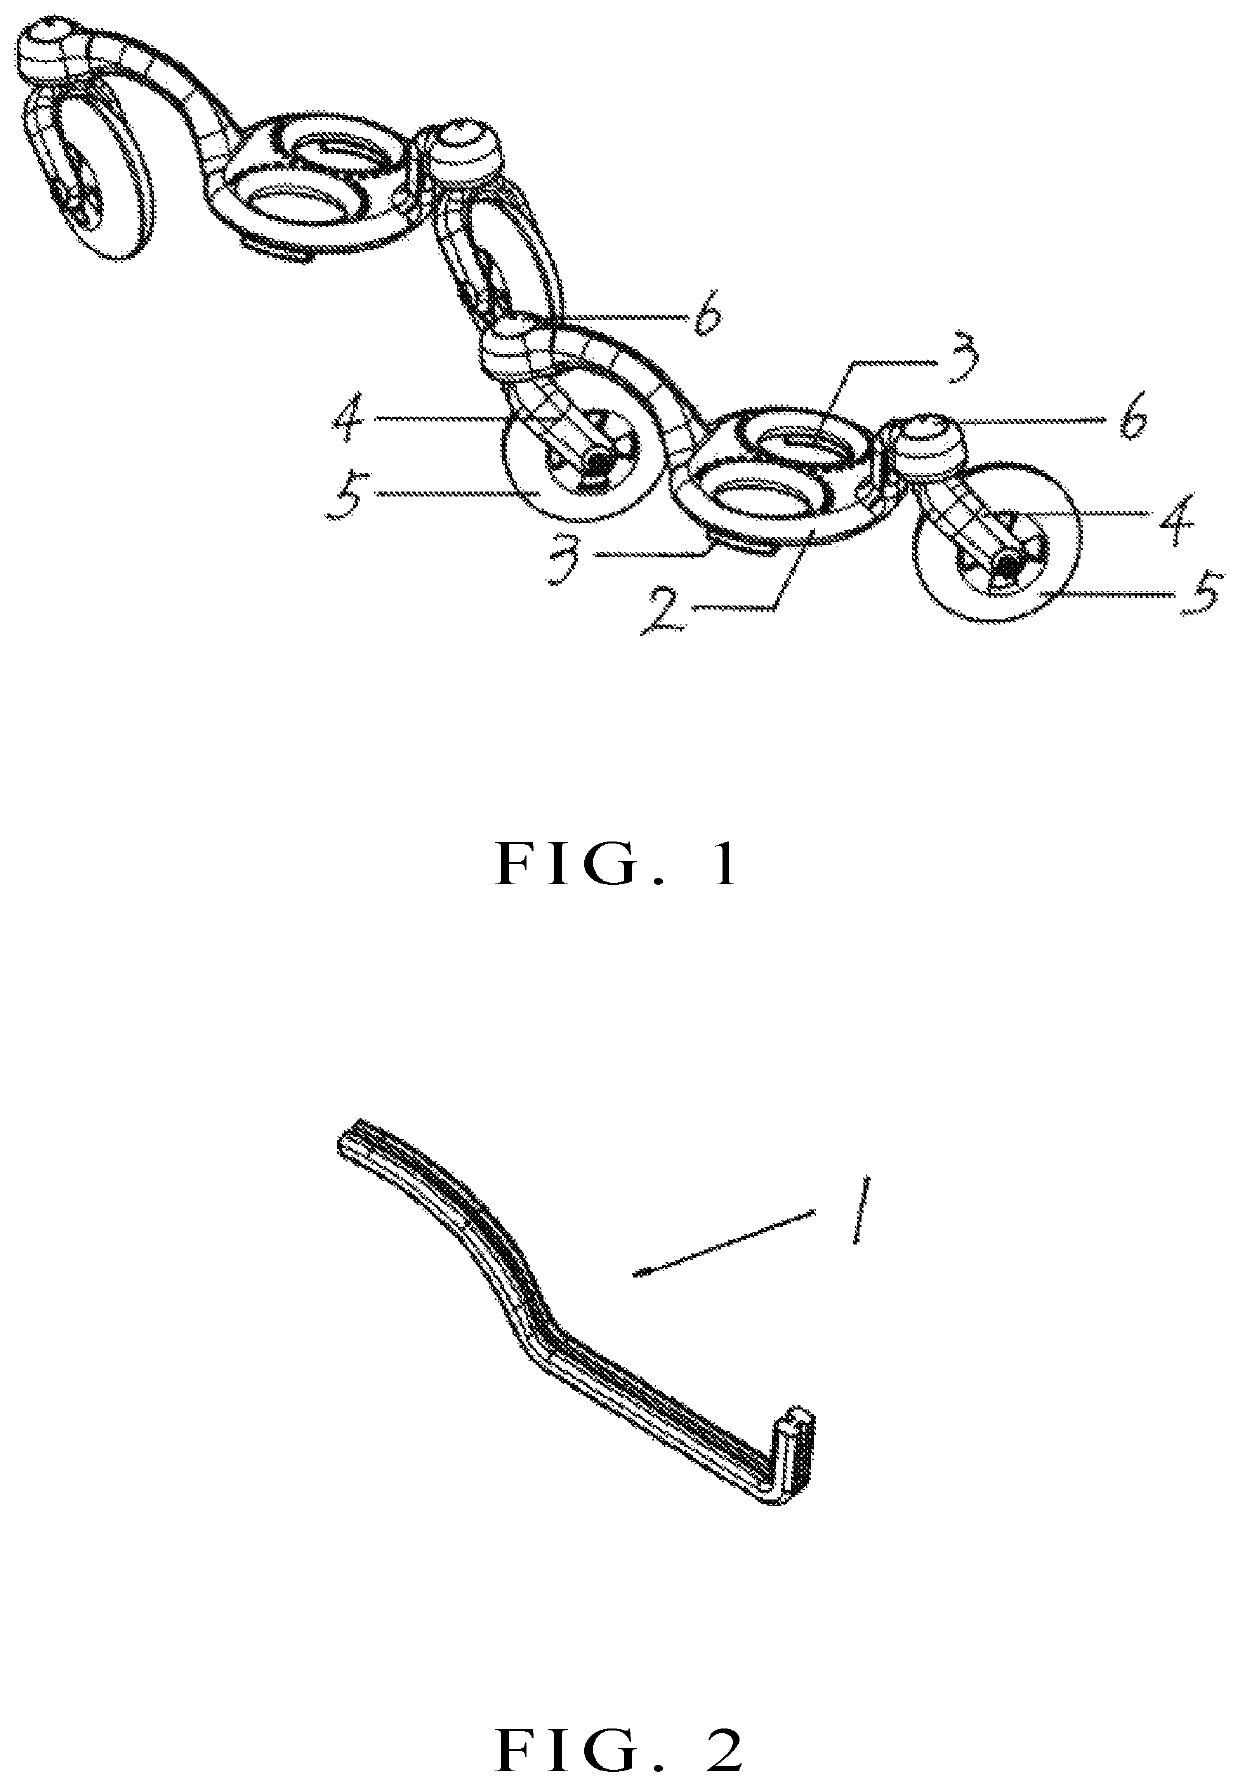 Swing roller skate with novel manufacturing process